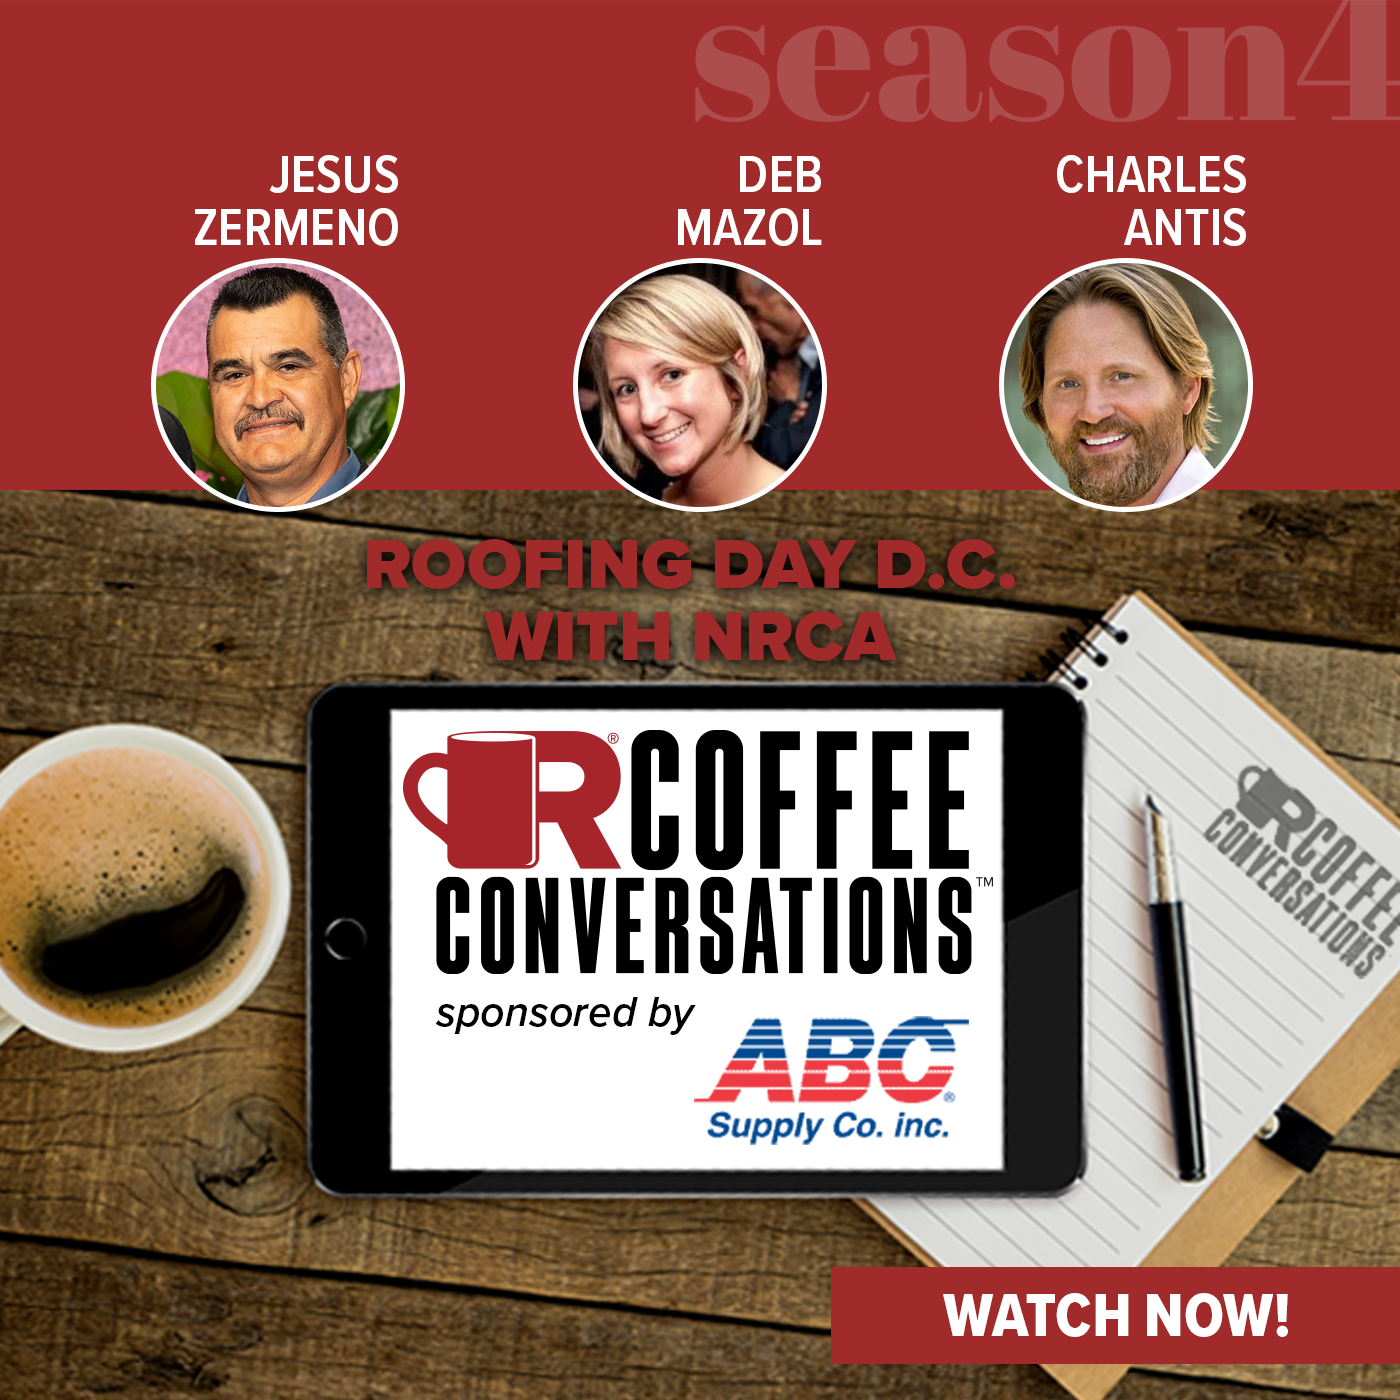 ABC - Coffee Conversations - Roofing Day 2023 Making a Difference - POD